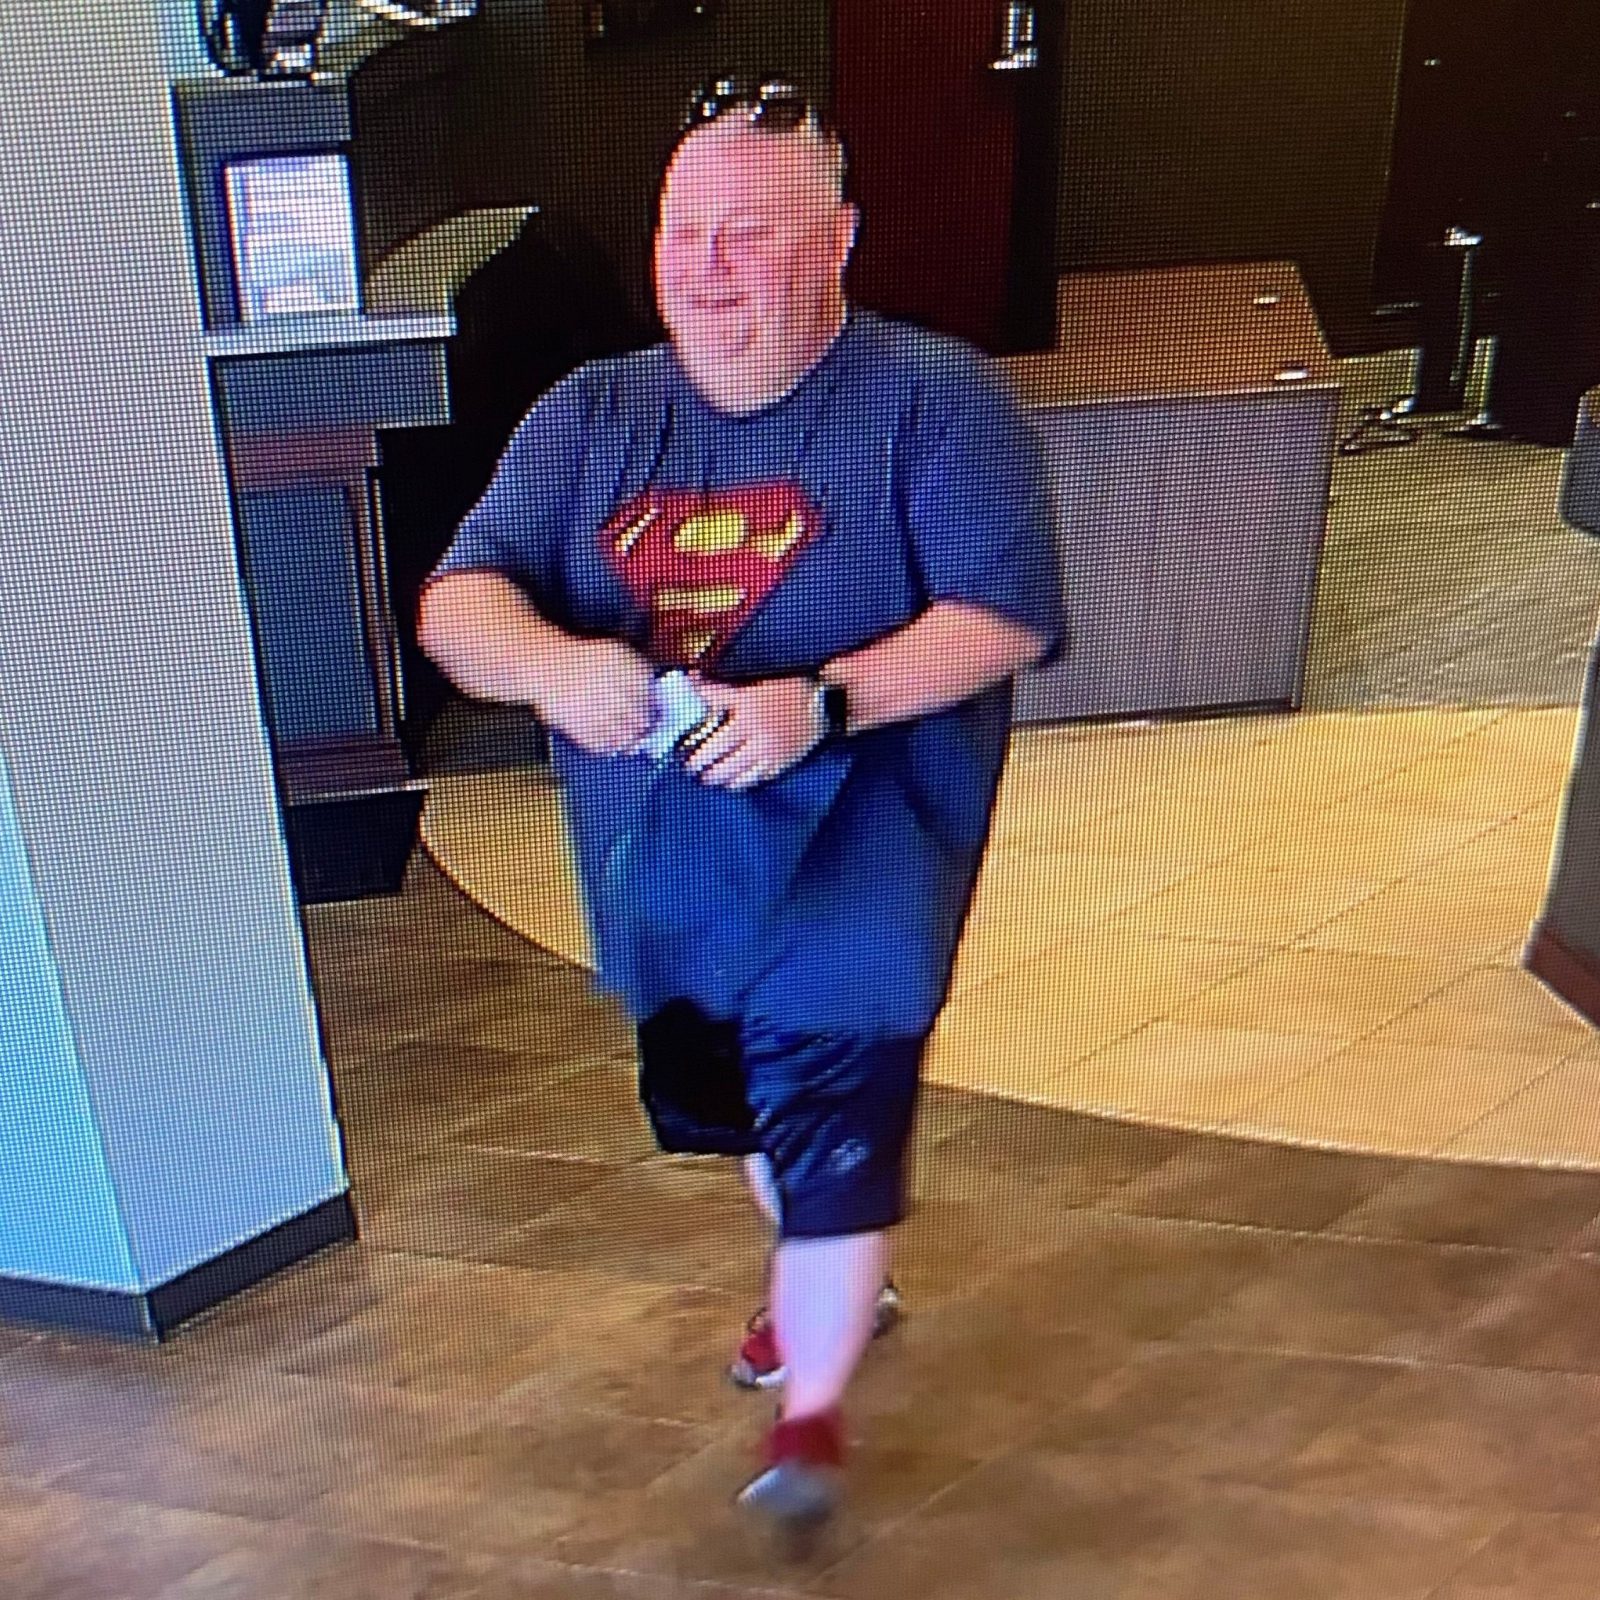 Man suspected of robbing Legacy Bank branch in Springfield Sept. 29. He is bald, between 5-foot-10 and 6 feet tall, and was wearing a blue T-shirt with the Superman logo.